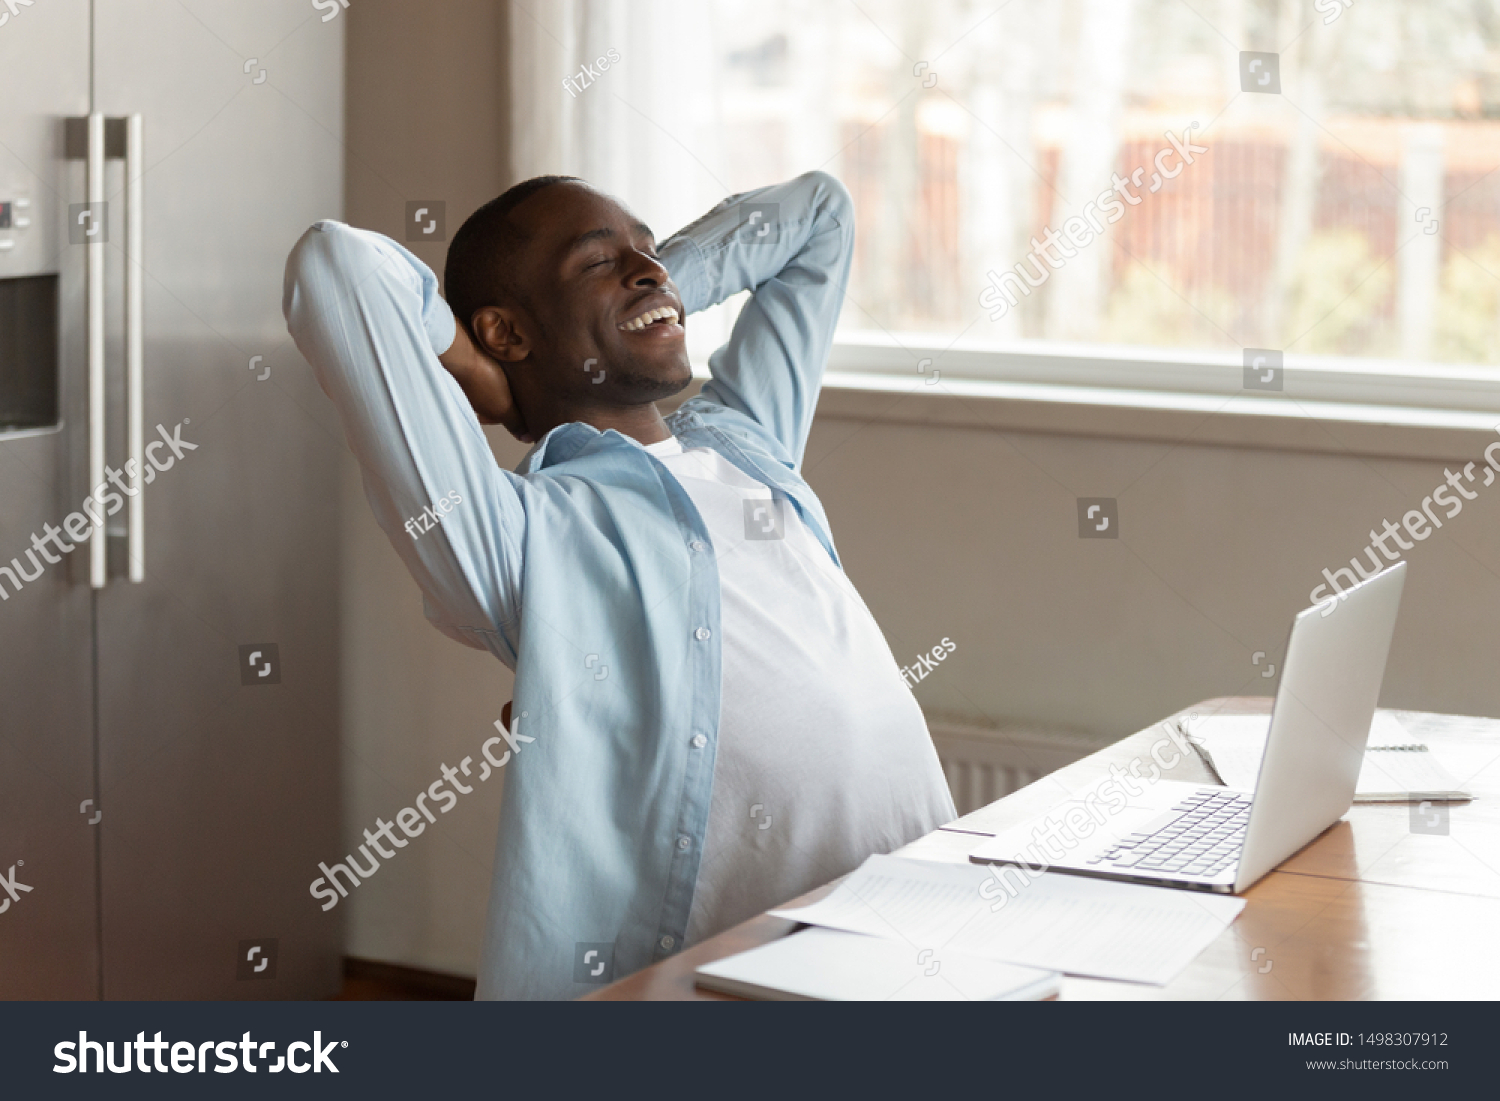 Calm relaxed african American male worker sit at table distracted from work dreaming or visualizing, peaceful dreamy biracial man lean back relax in chair with eyes closed smiling thinking of success #1498307912